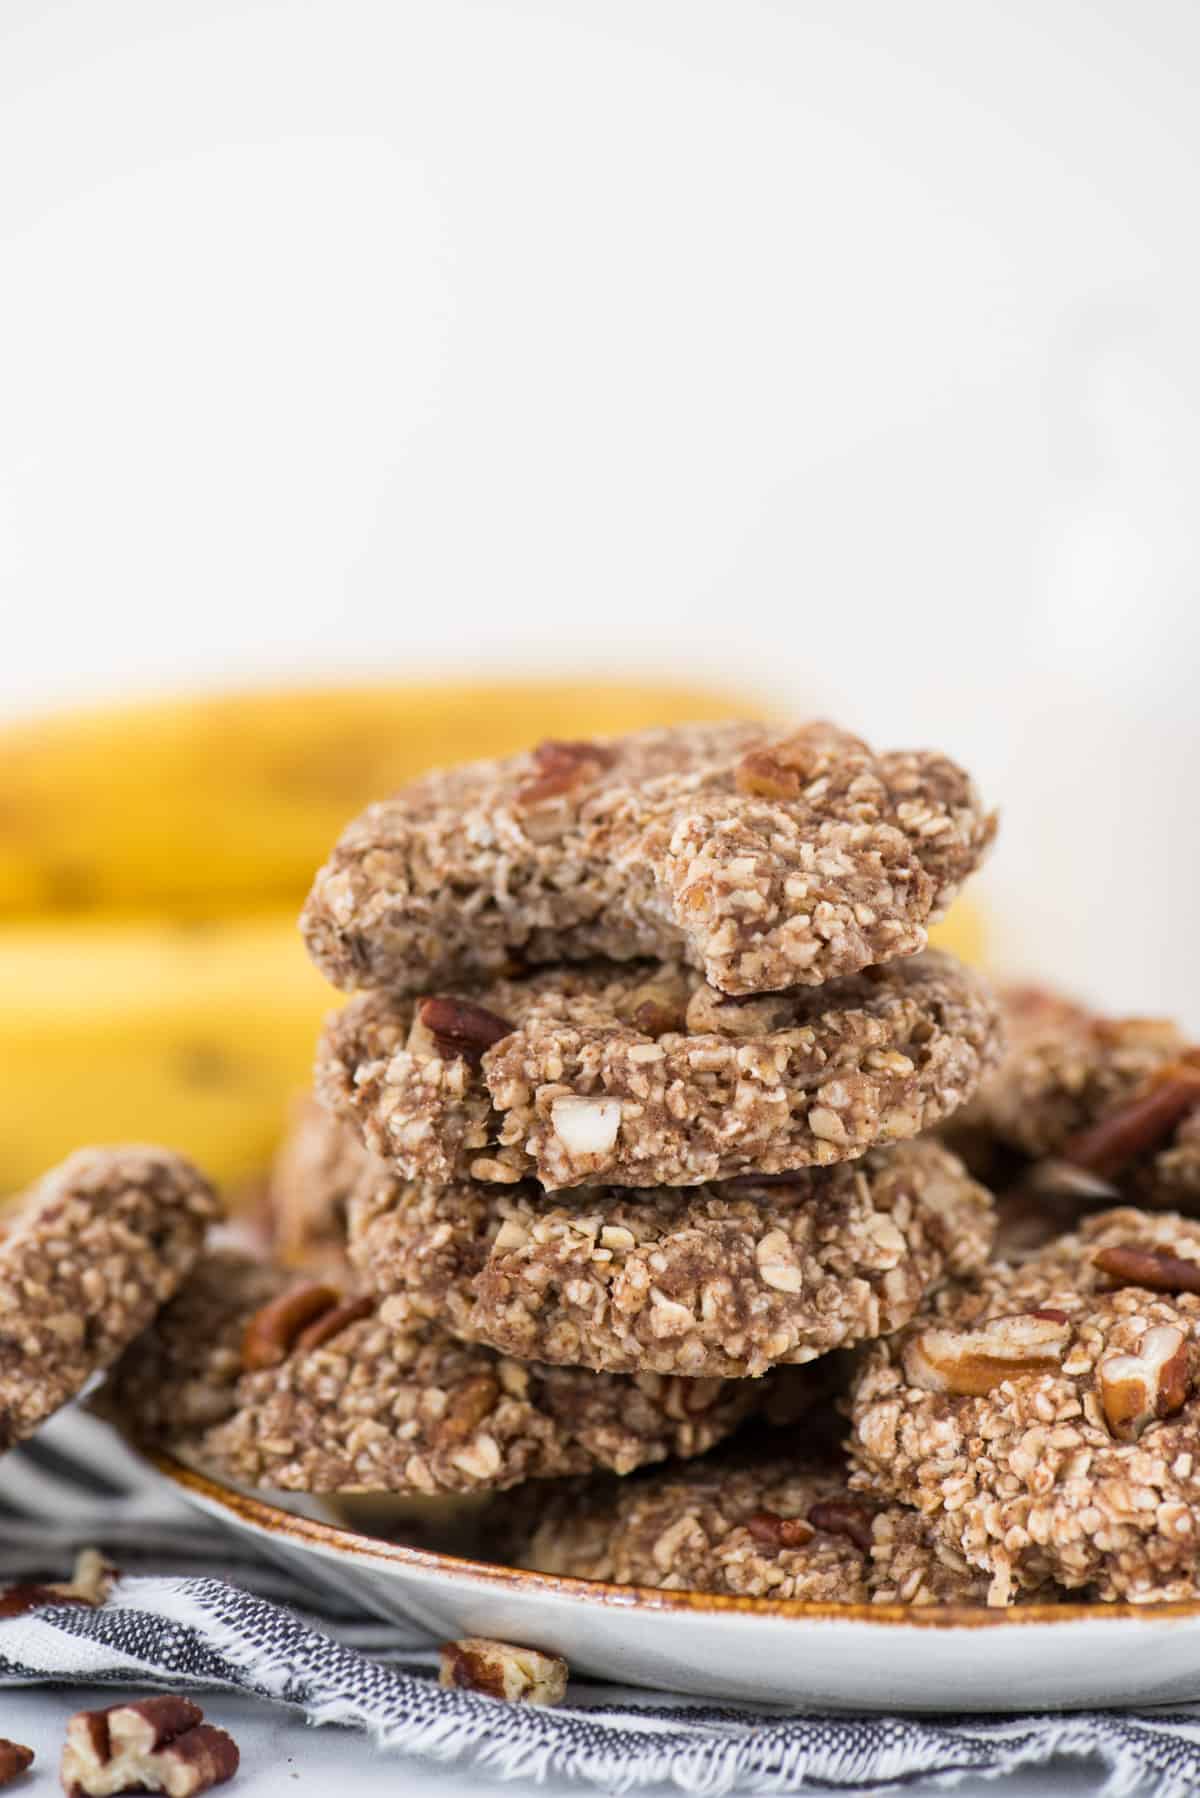 banana breakfast cookies on a white plate with striped towel underneath